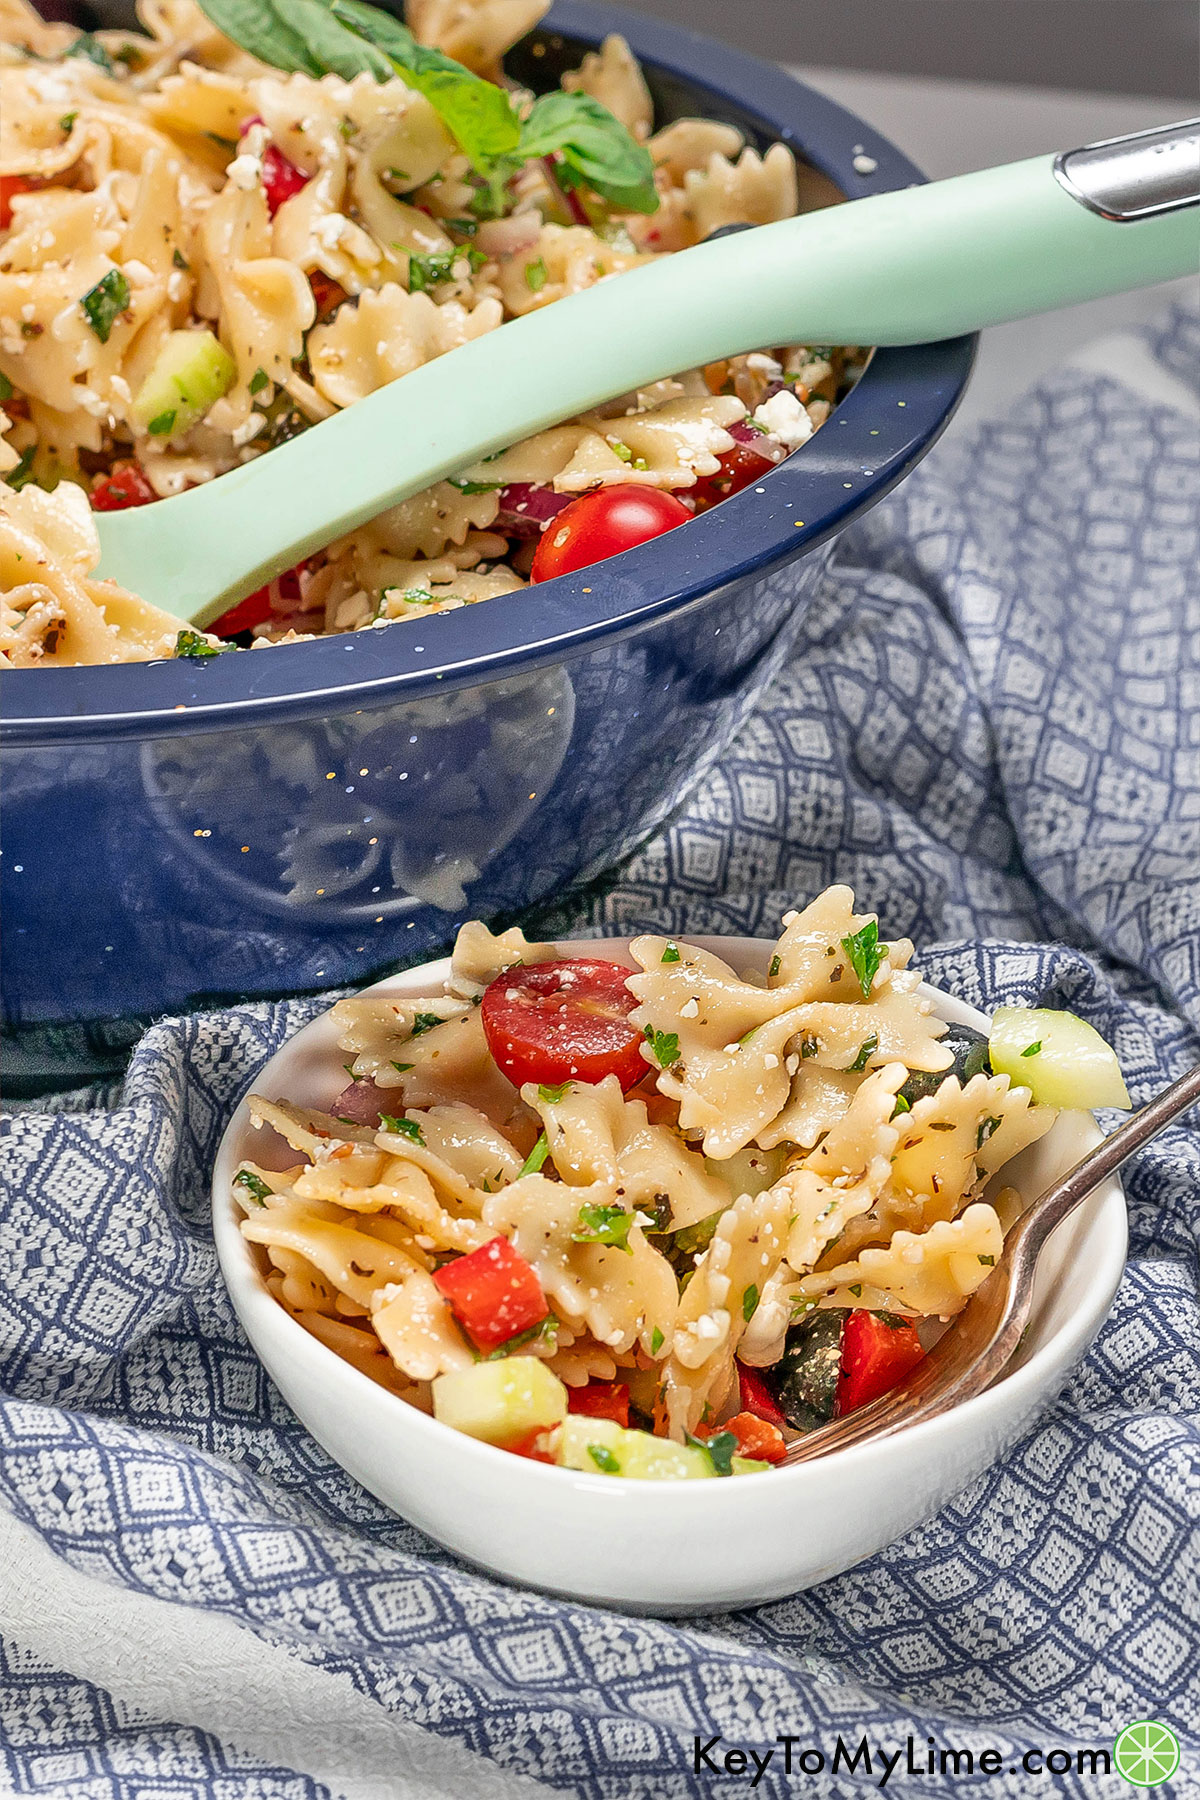 A side shot of pasta salad in a small serving bowl next to a large mixing bowl full of pasta salad.